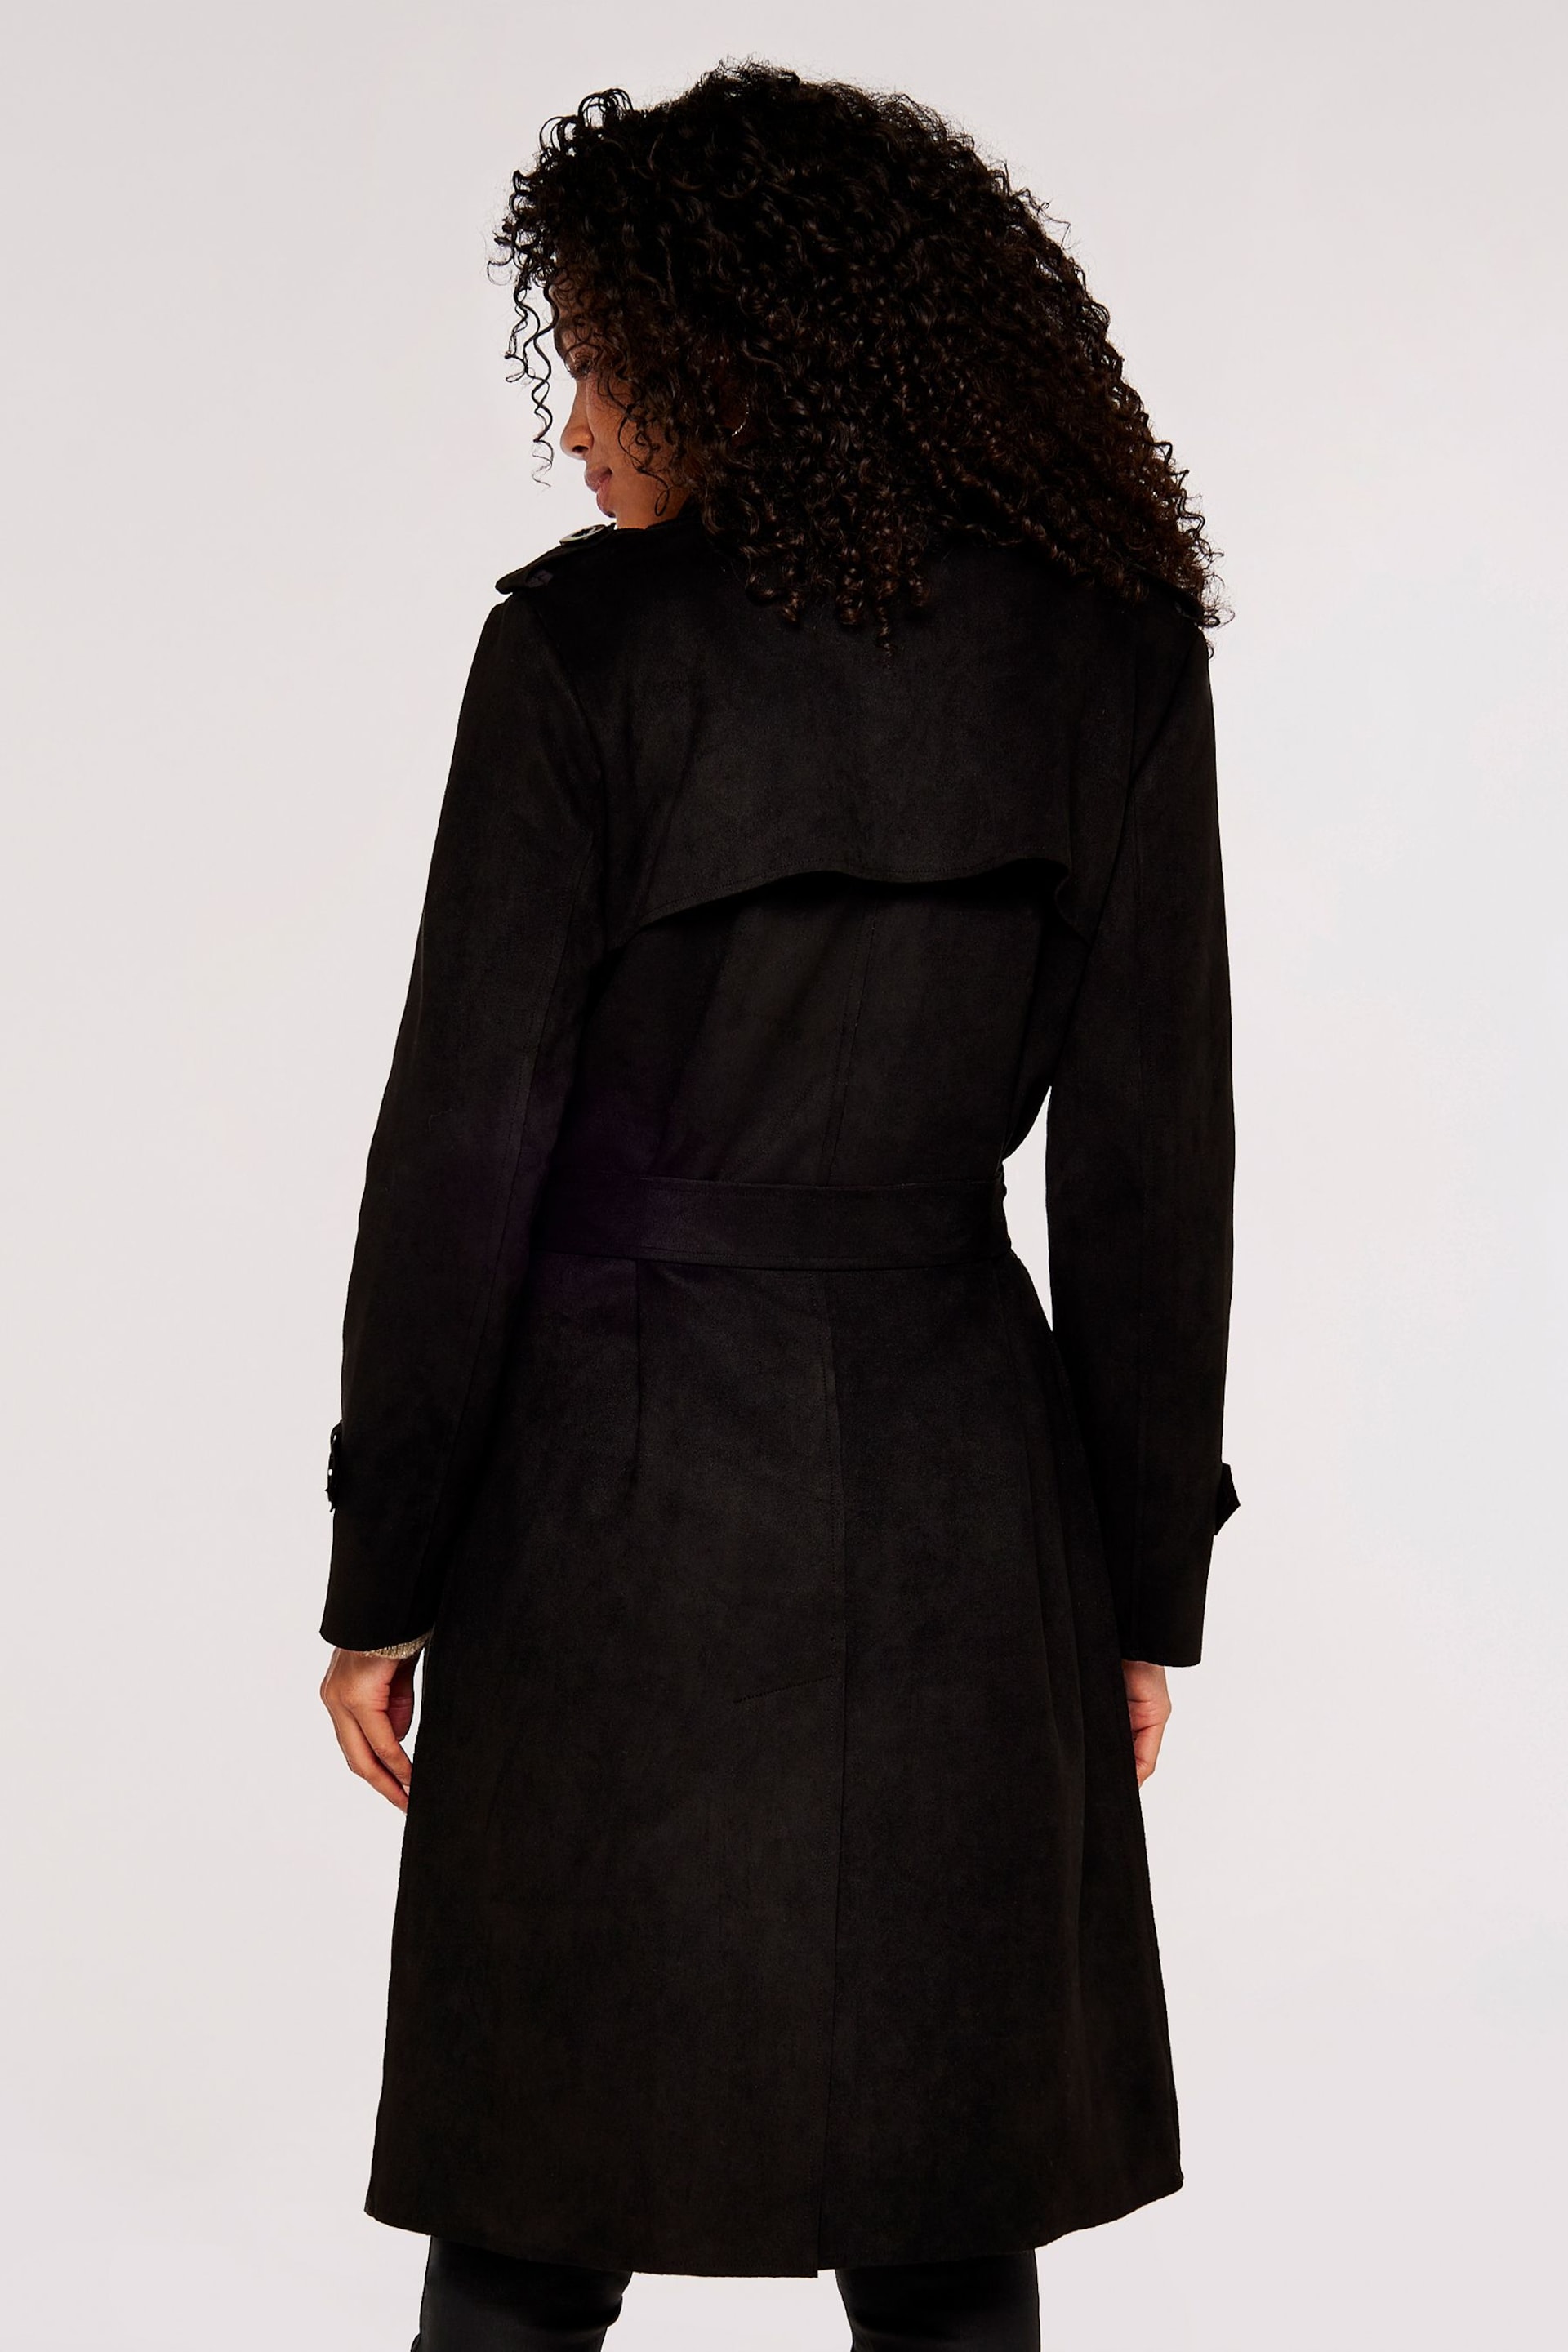 Apricot Black Faux Suede Double Breasted Trench Coat - Image 2 of 5